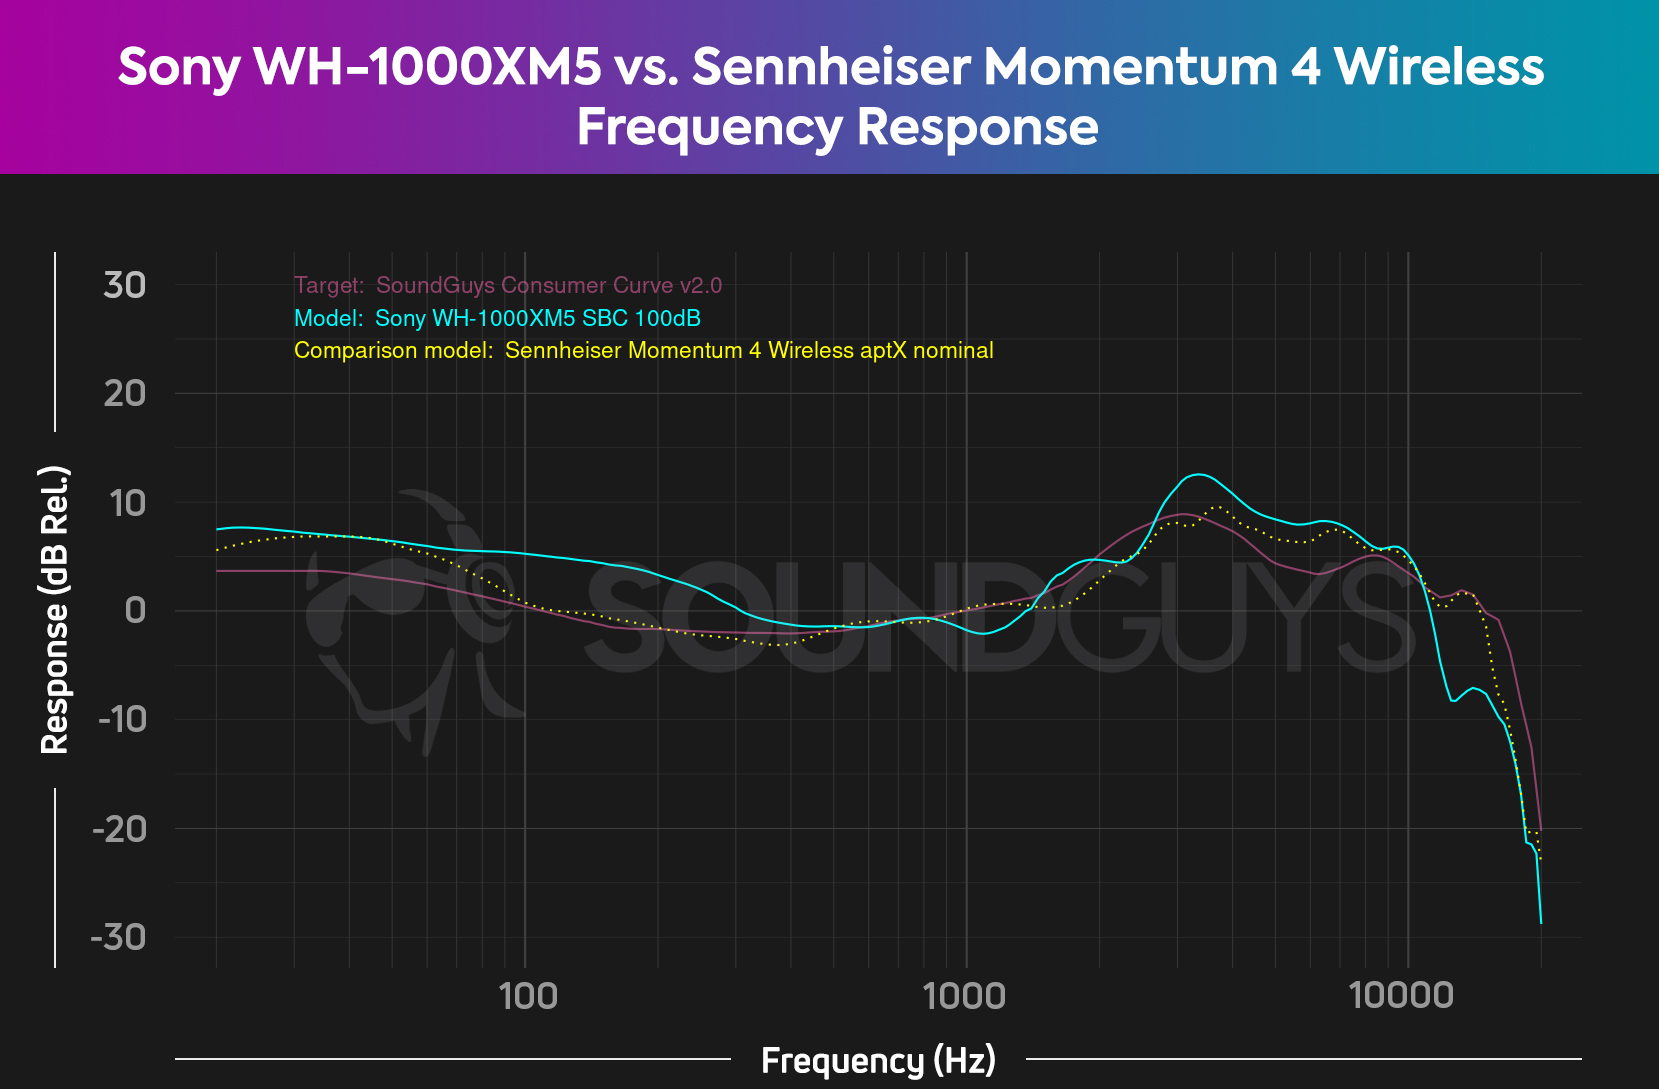 A frequency response comparison chart for the Sony WH-1000Xm5 and Sennheiser Momentum 4 Wireless bluetooth headphones, which shows more accurate bass response from the Momentum 4.